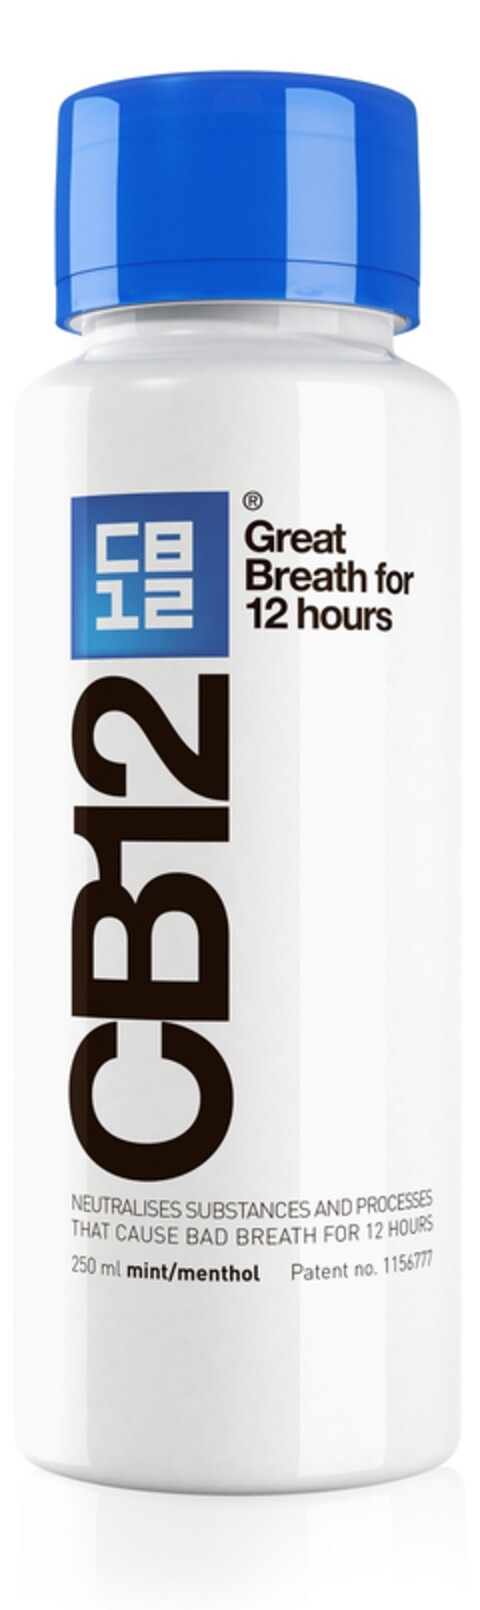 CB 12 CB12 Great Breath for 12 hours Logo (EUIPO, 13.02.2019)